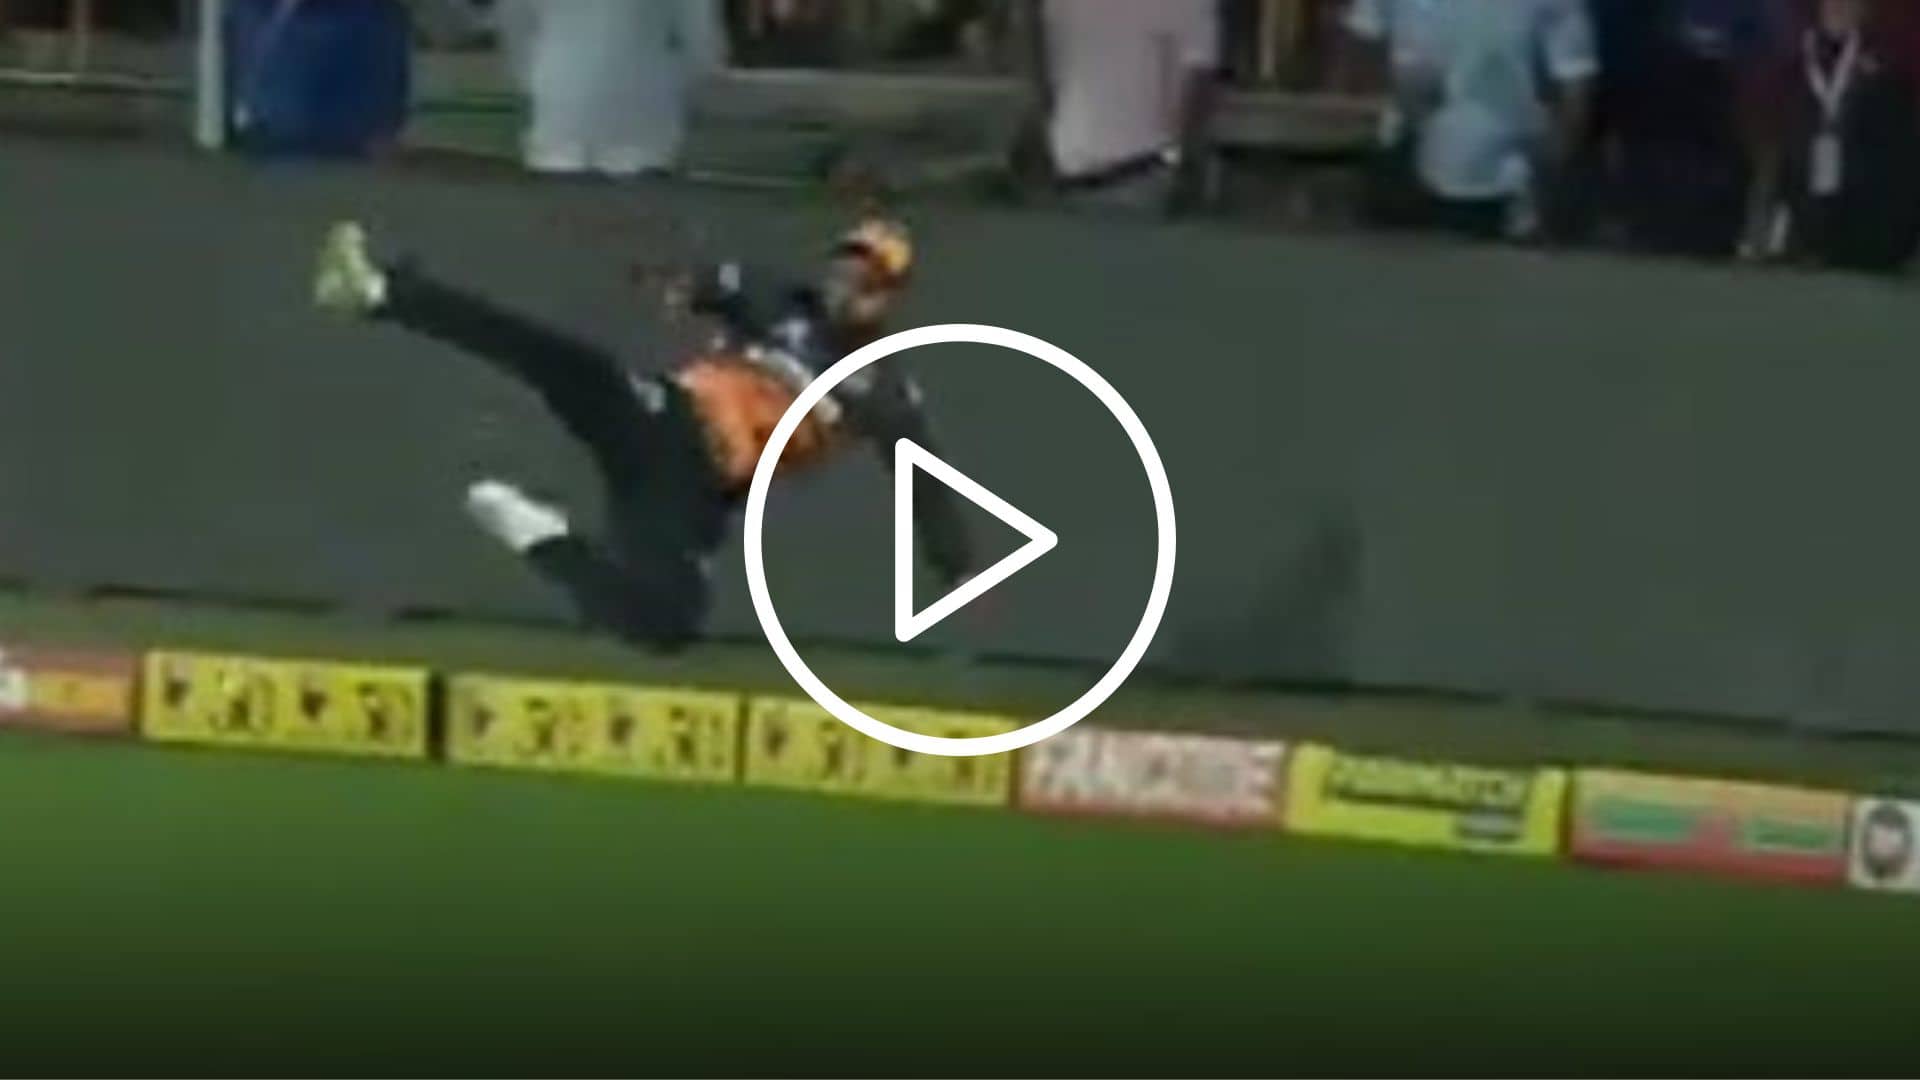 [Watch] Manish Pandey’s Sensational Flying Stop At Boundary Line Steals Limelight